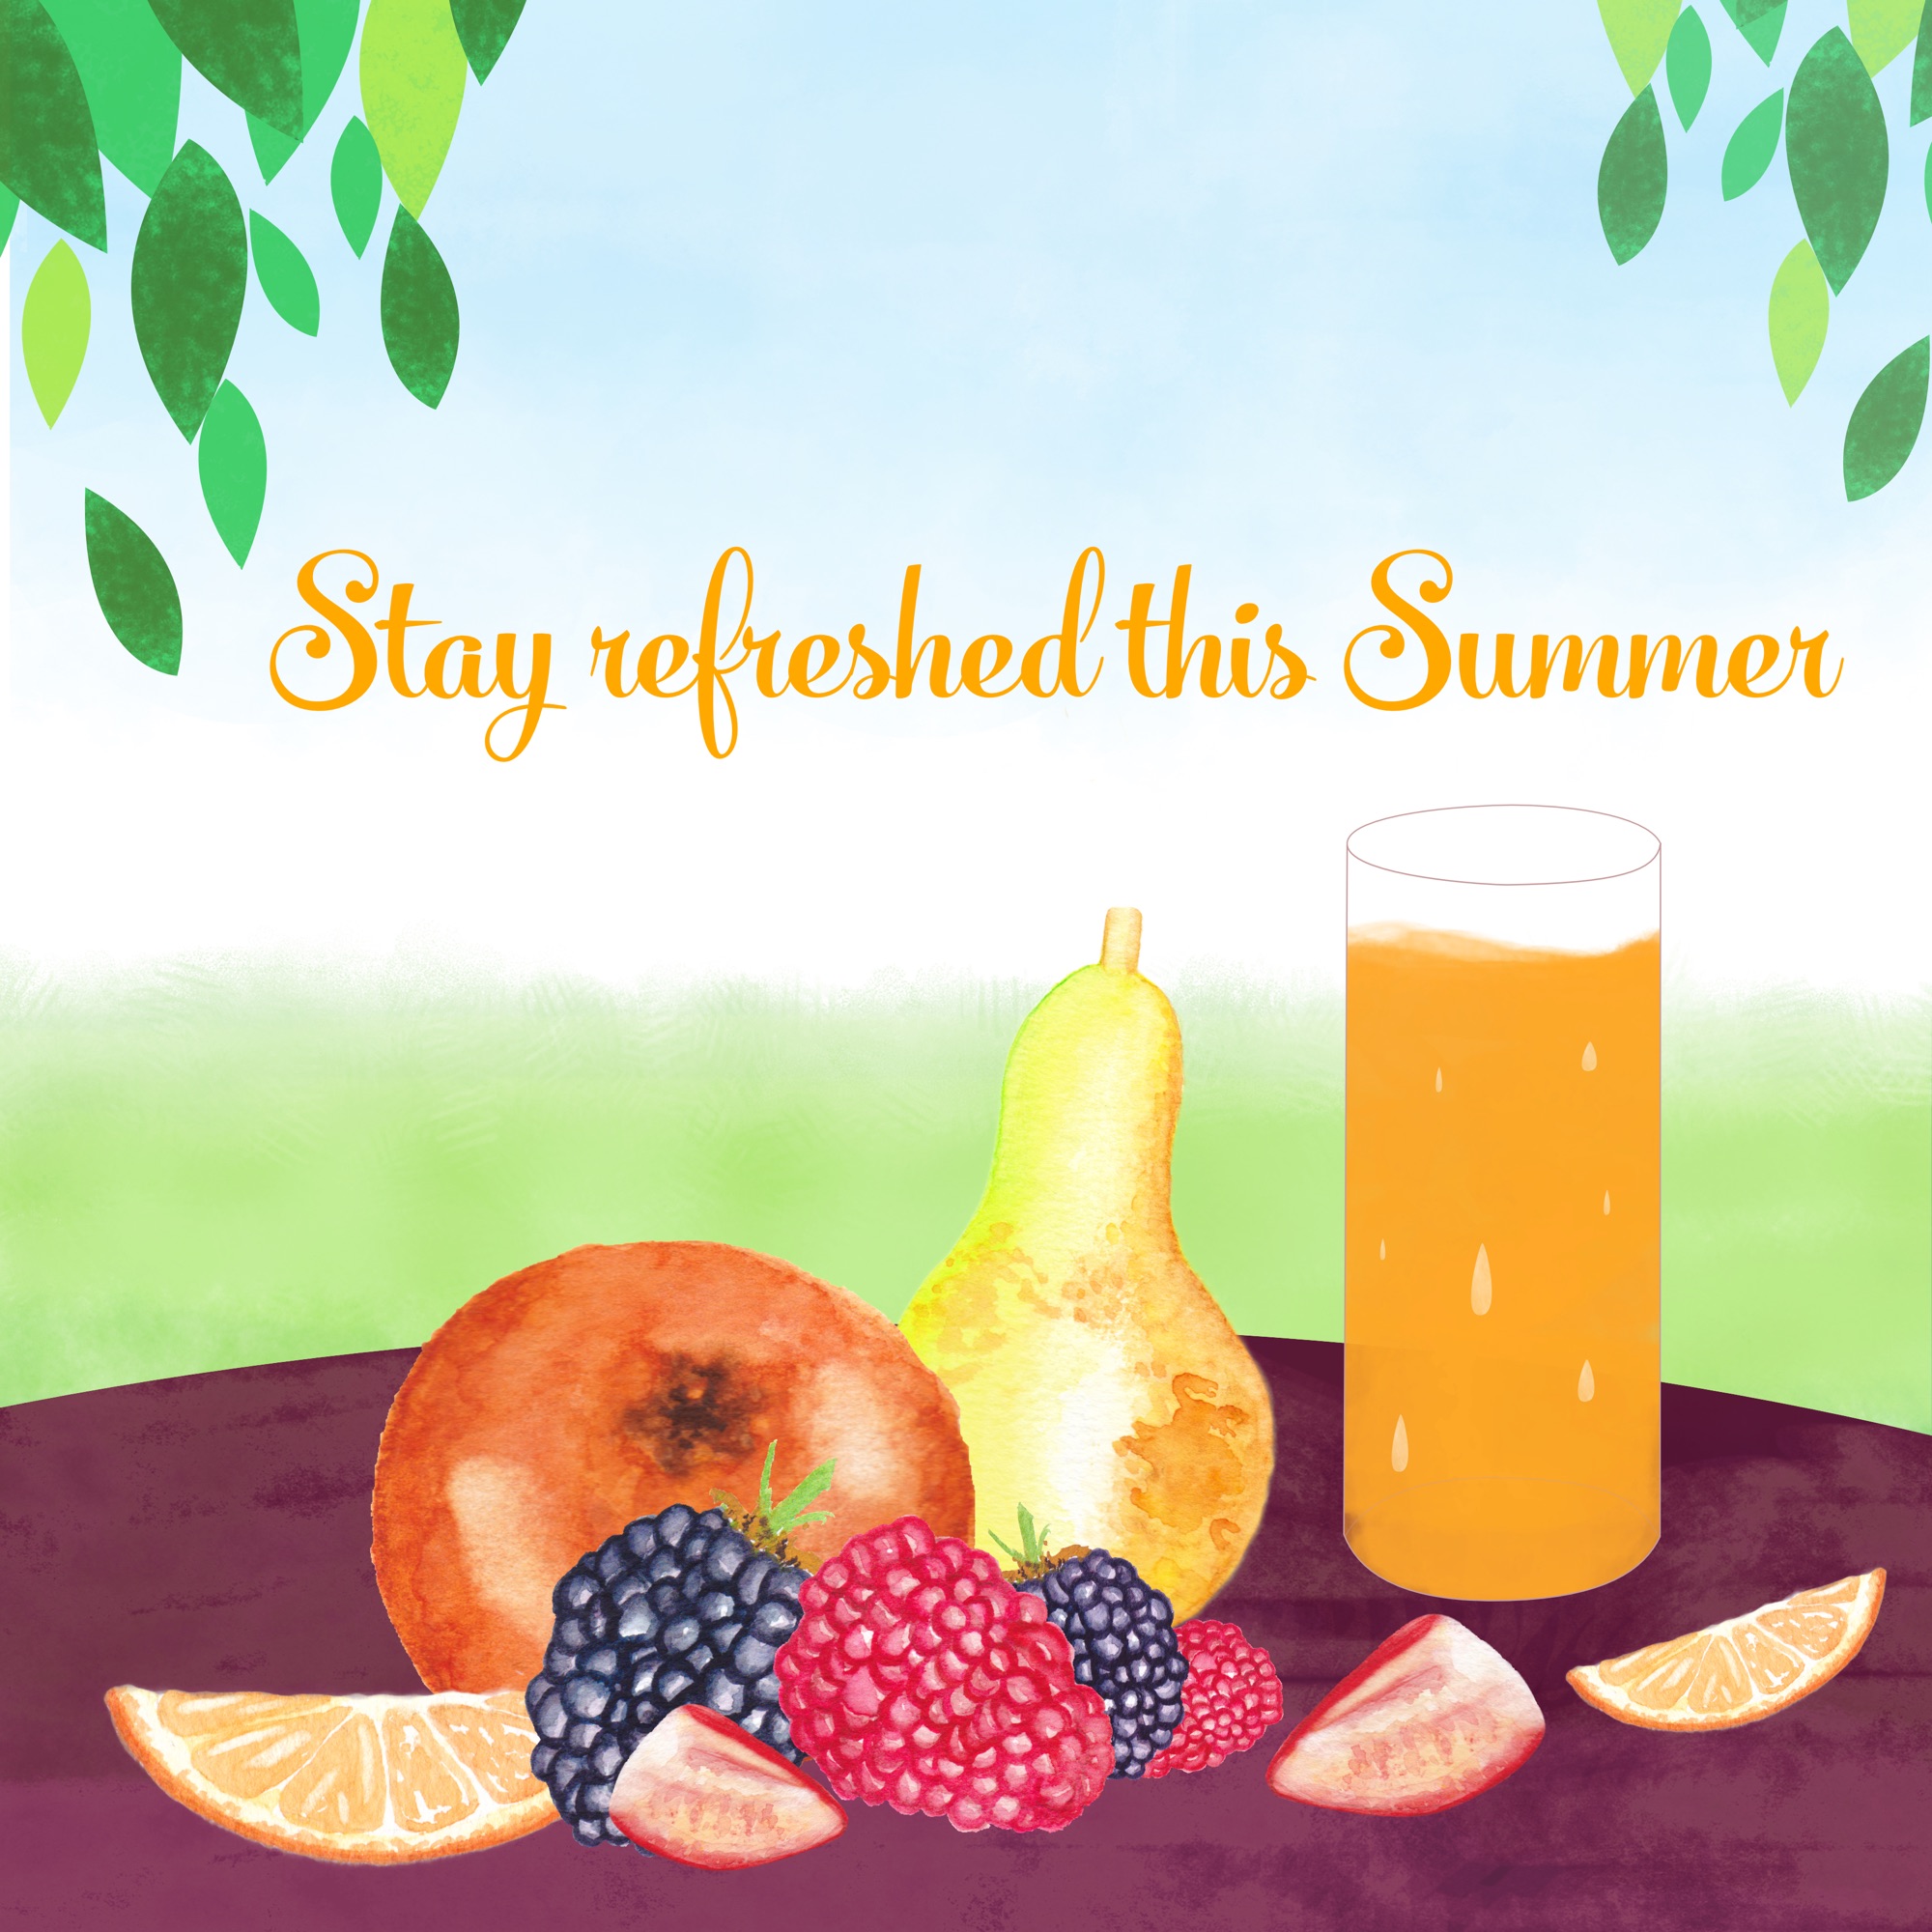 Summer Fruits & Juice Digital Illustration by Stacey-Ann Cole